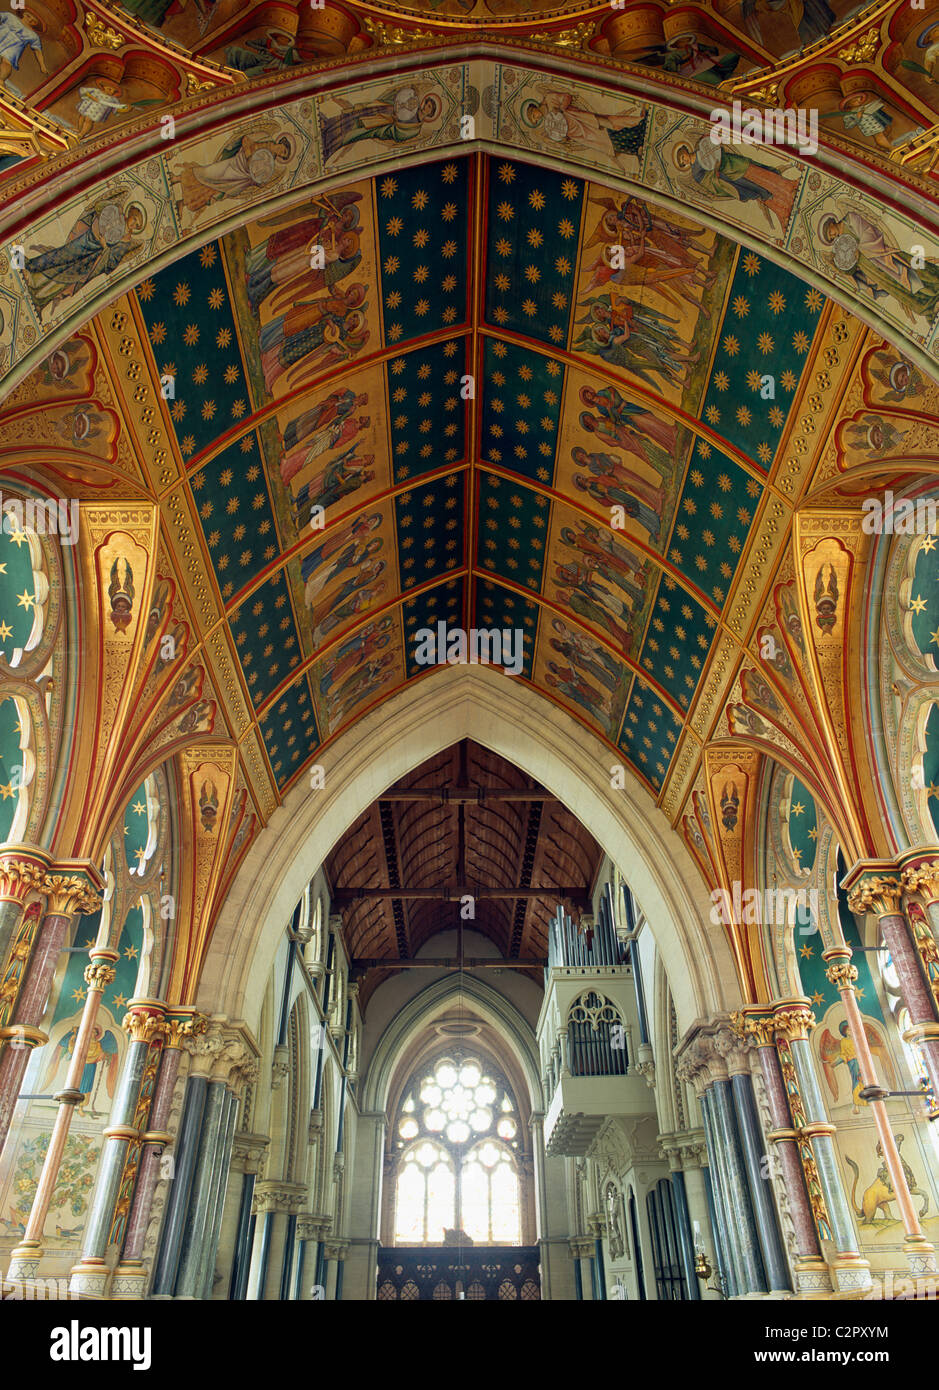 St Mary's Church, Studley Royal. Interior looking west. Stock Photo